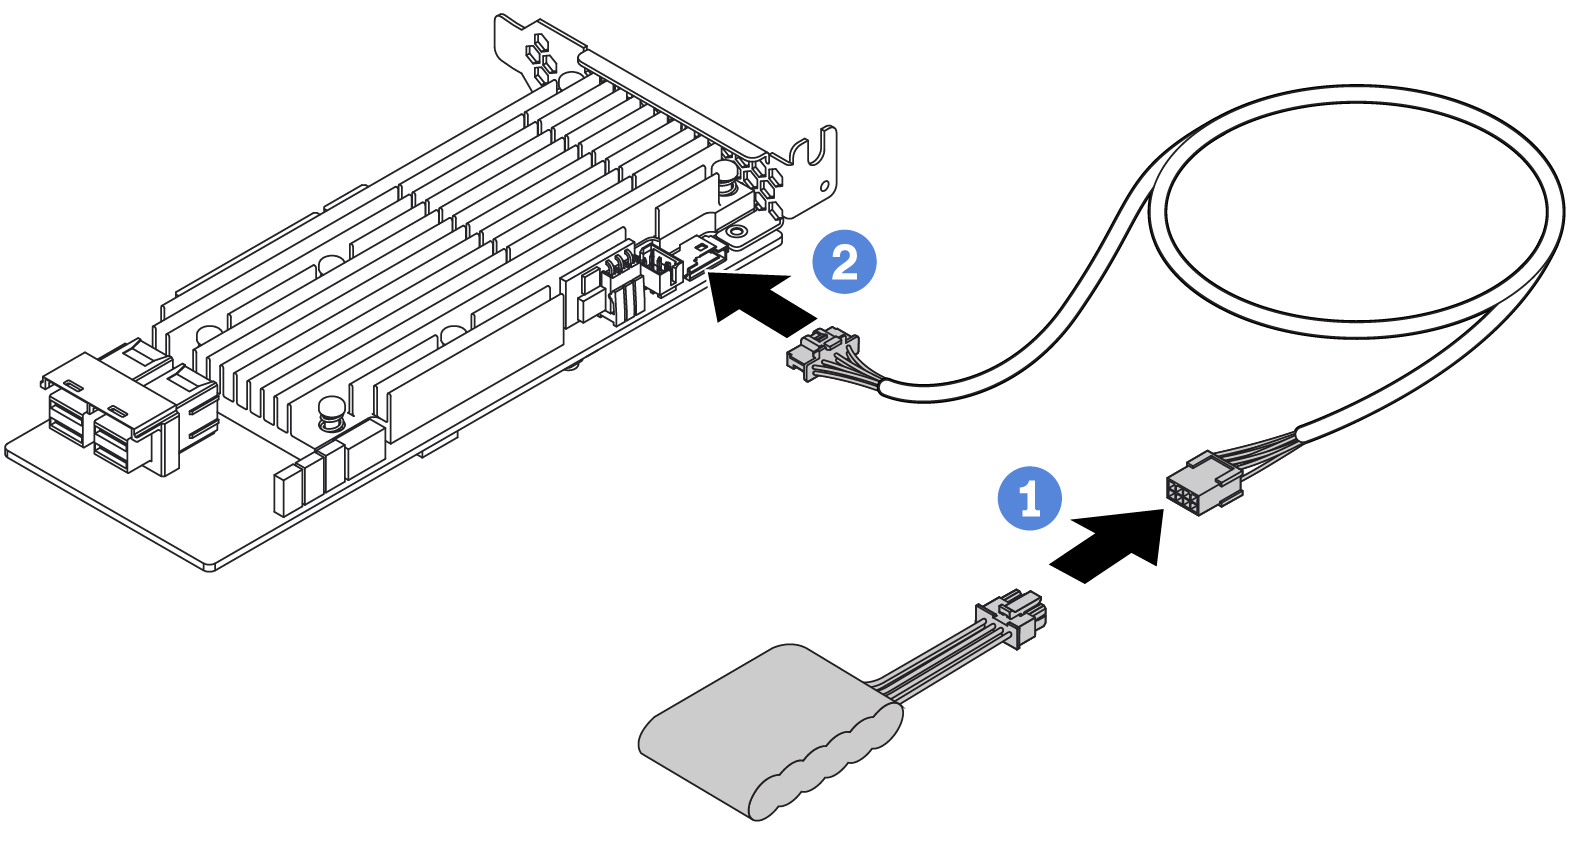 Power cable routing for other components